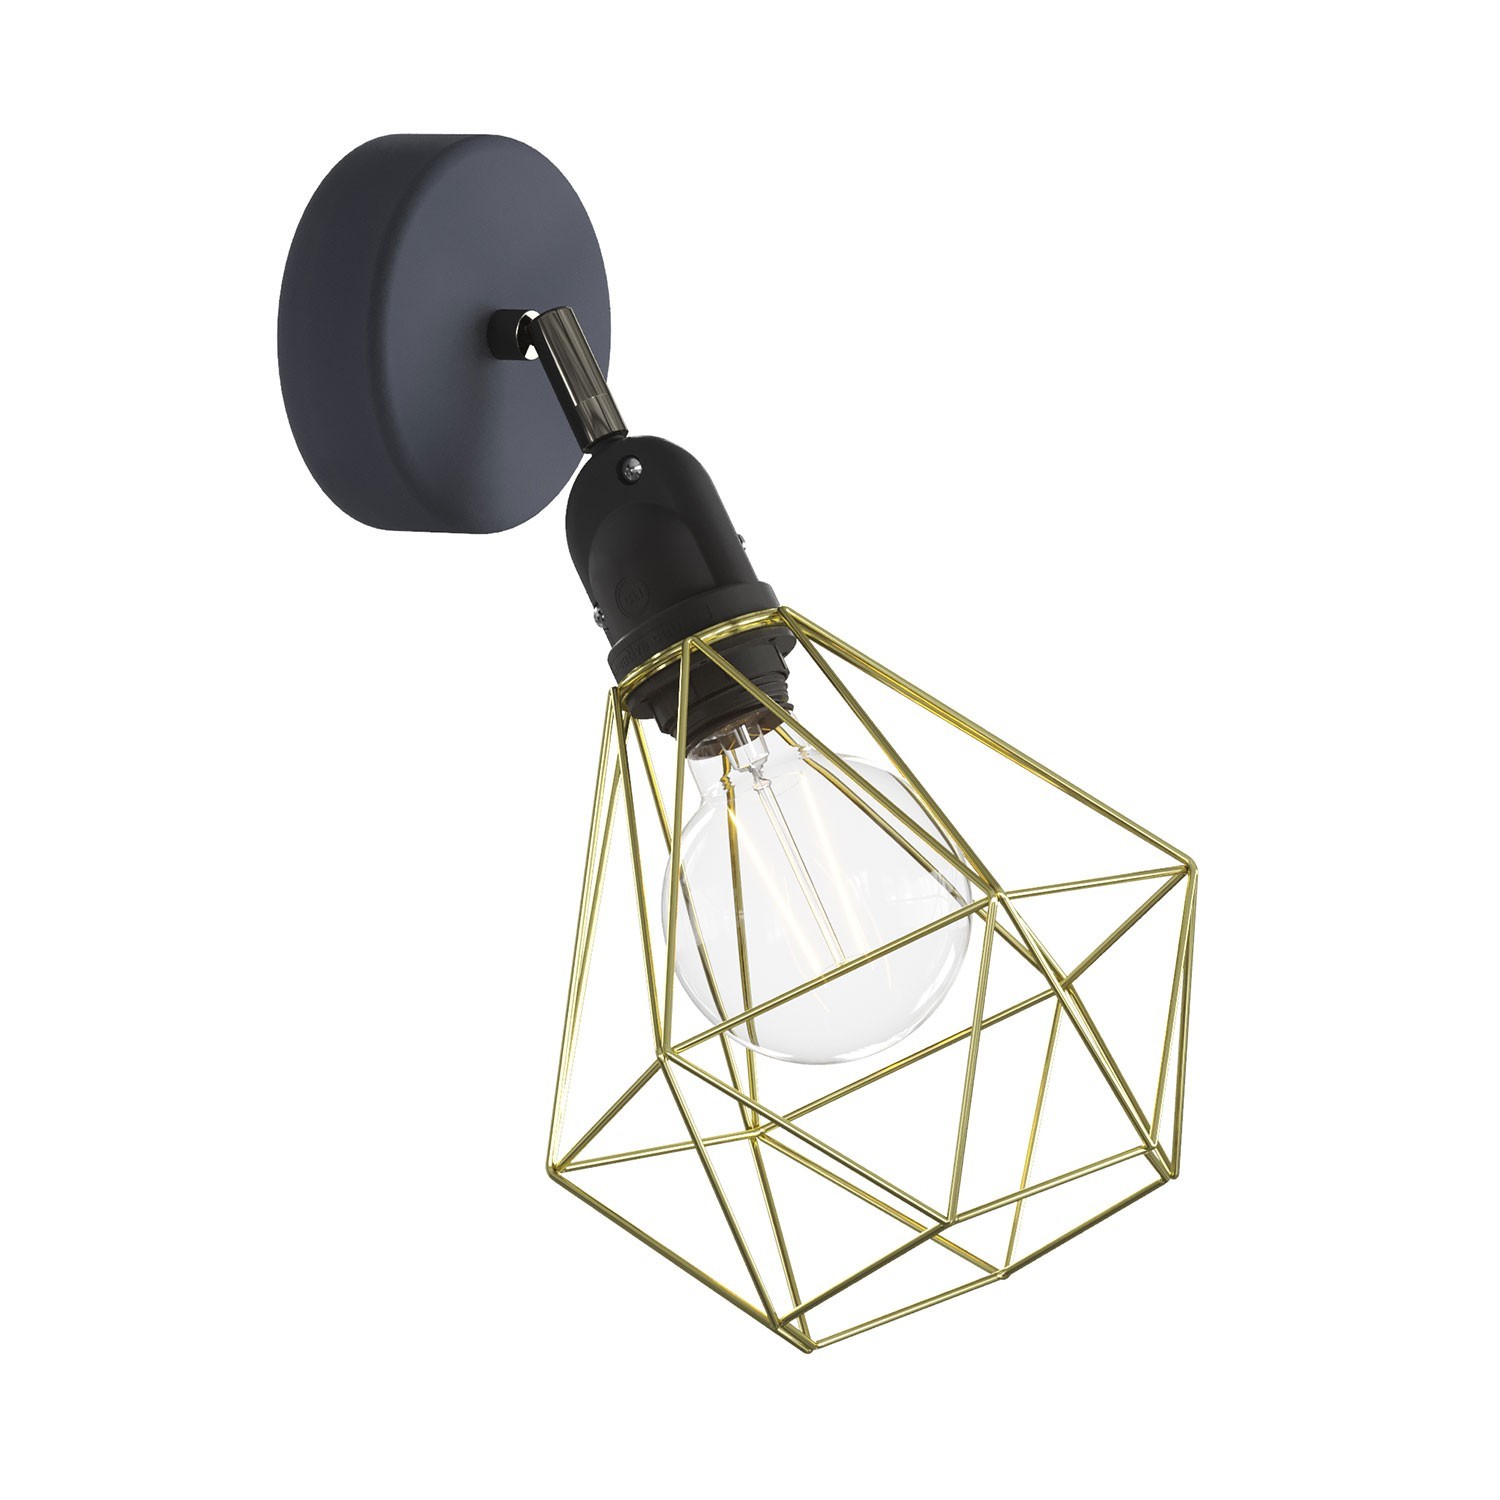 Fermaluce EIVA with Diamond lampshade and adjustable joint